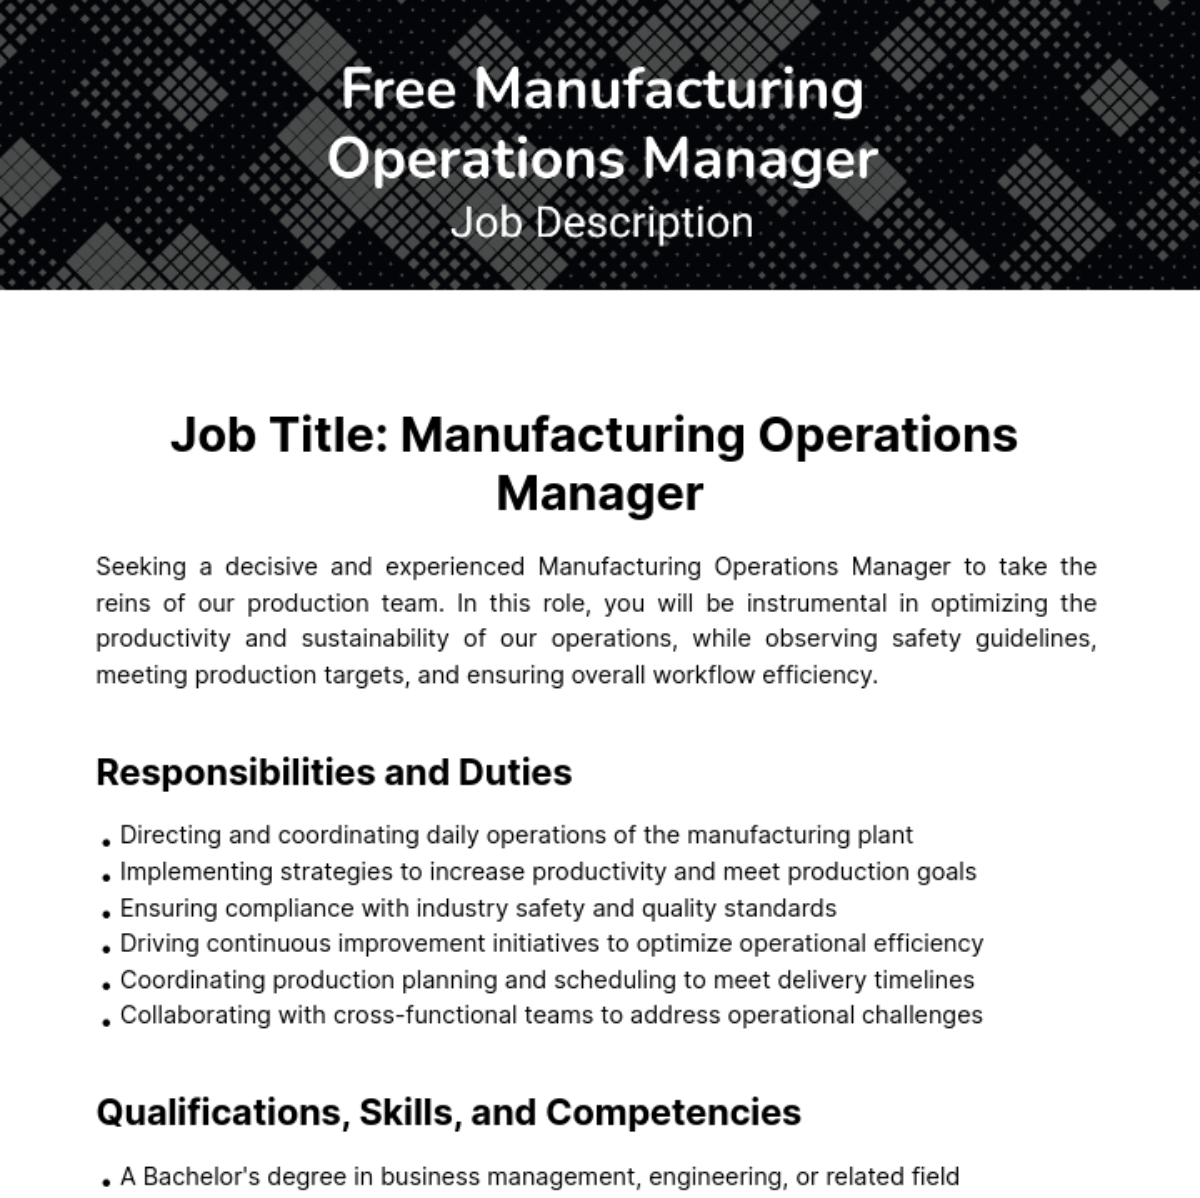 Manufacturing Operations Manager Job Description Template